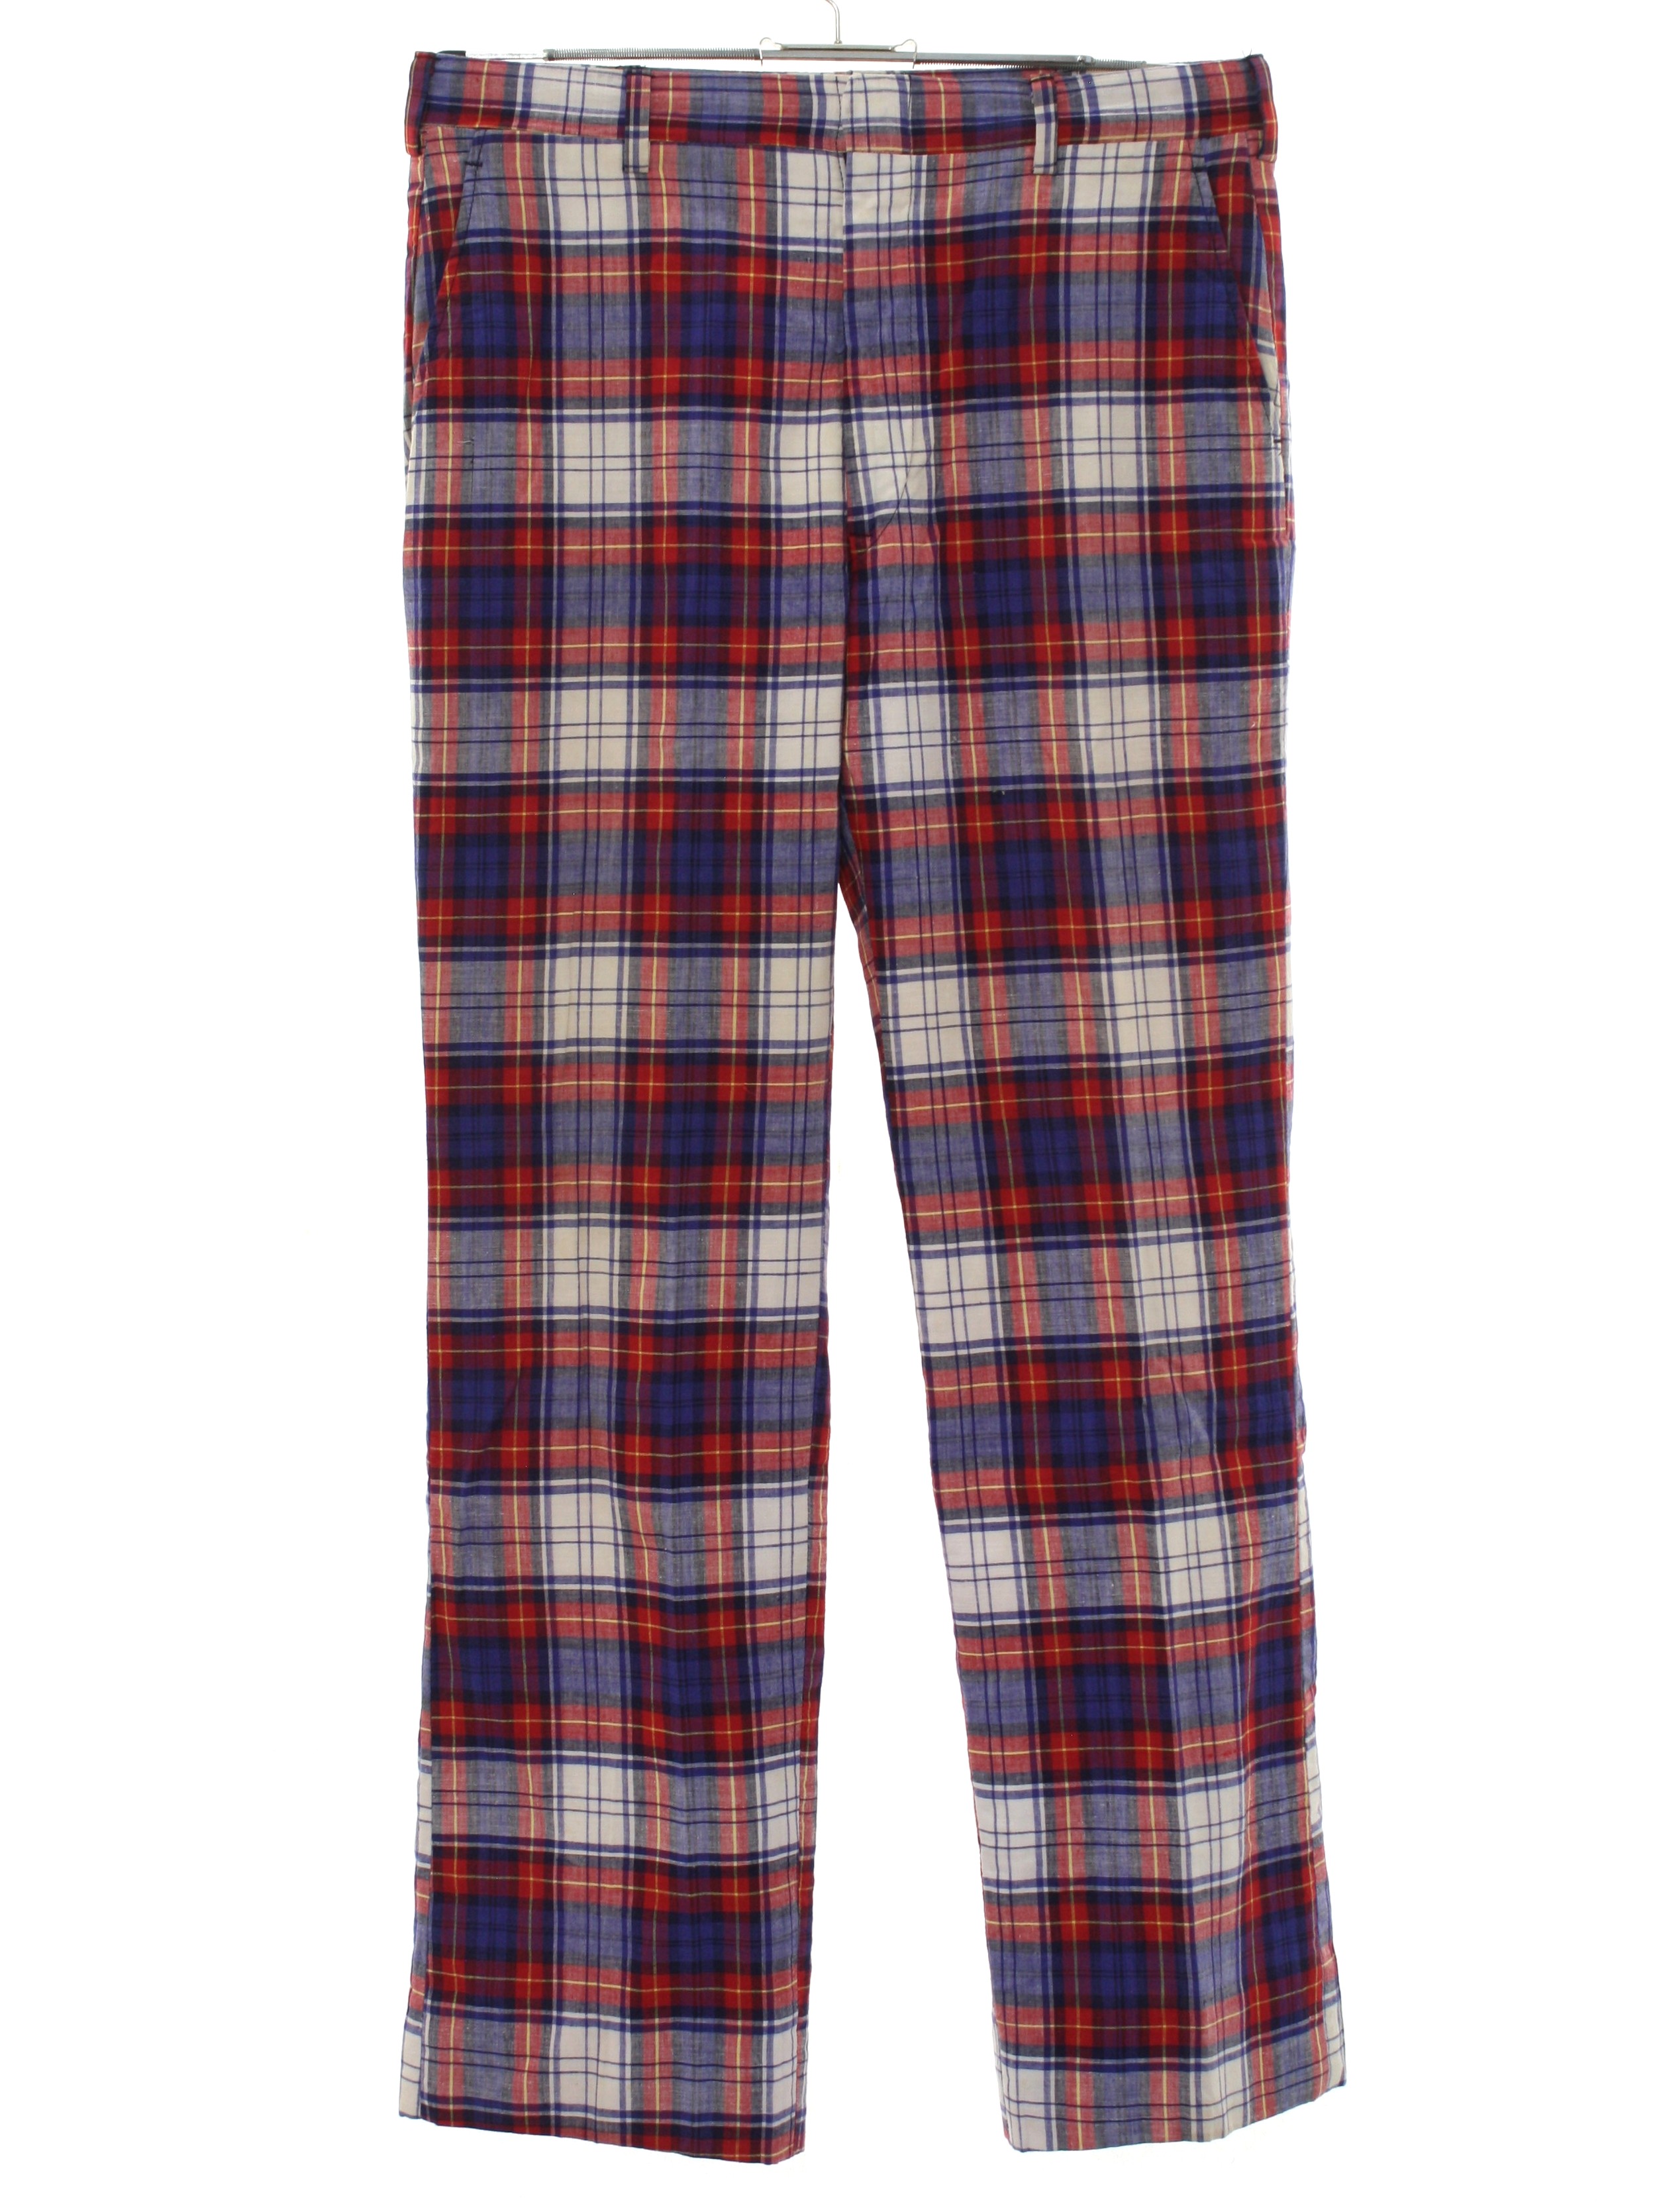 80s Vintage Filenes Pants: 80s -Filenes- Mens navy blue, red, white and ...